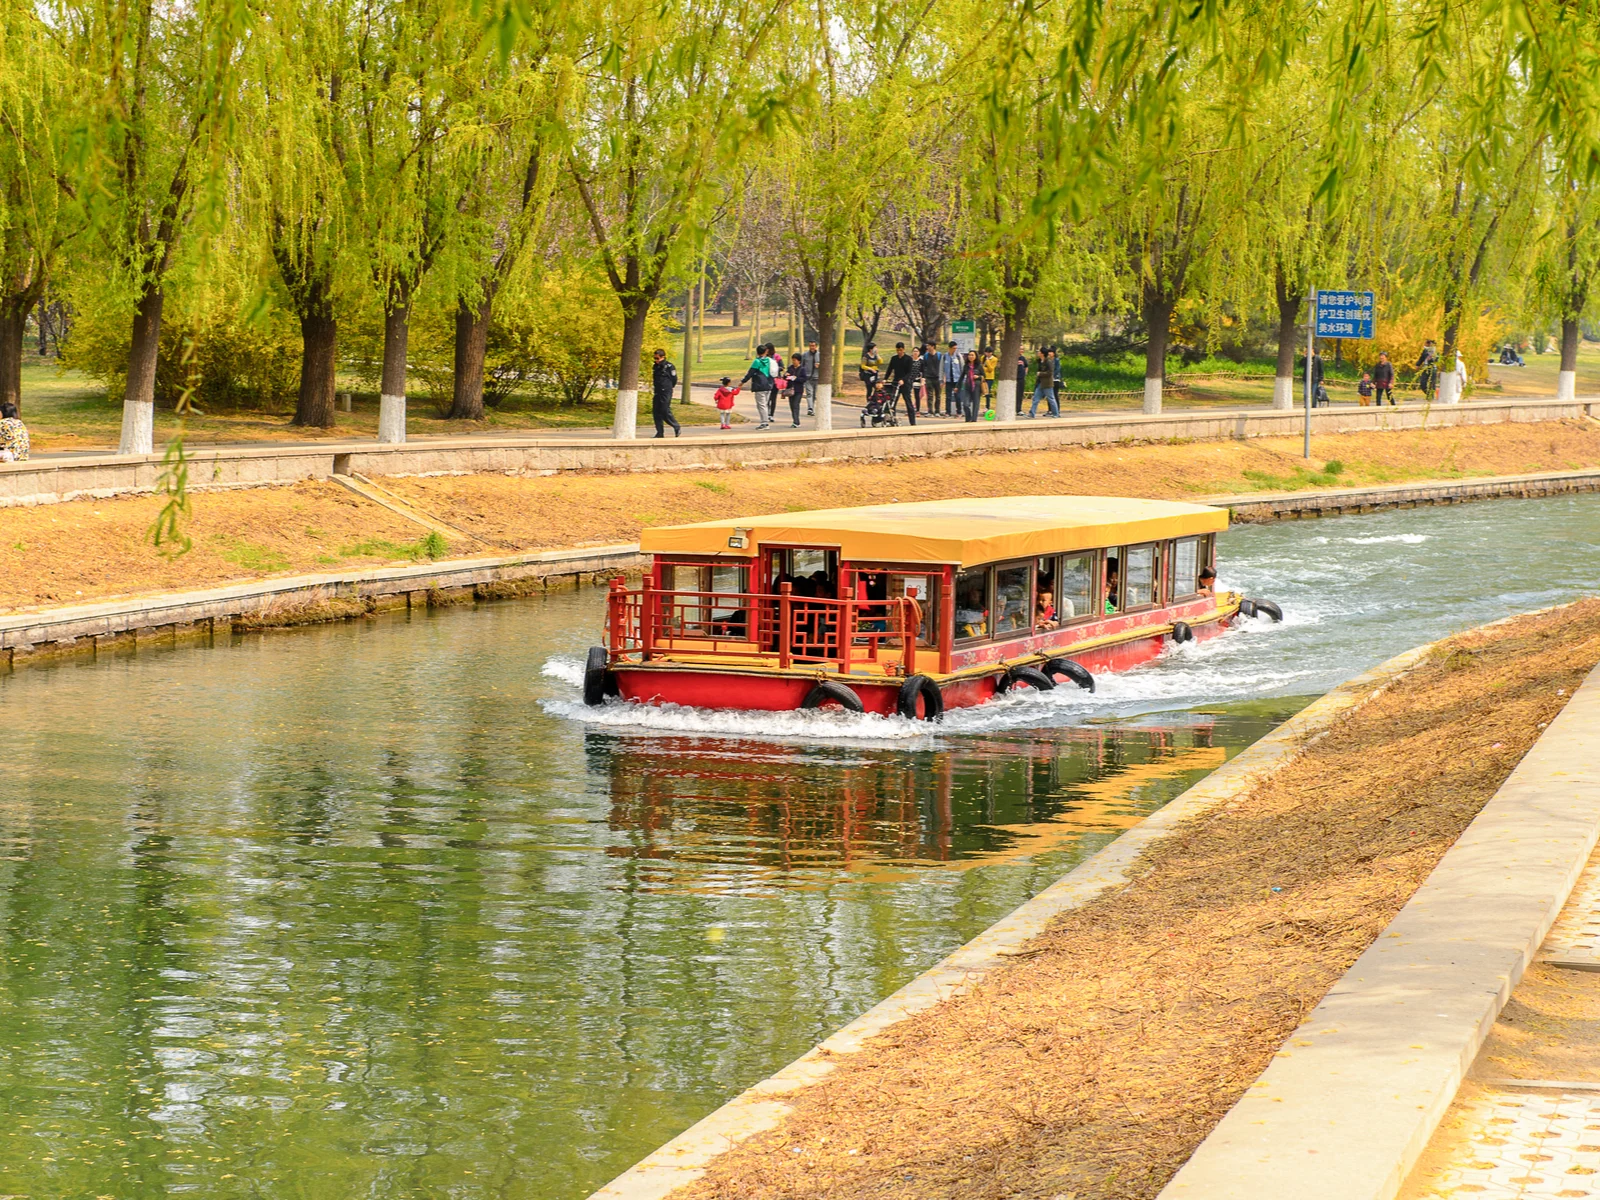 Boat ride at the Beijing zoo, one of the best zoos in the world